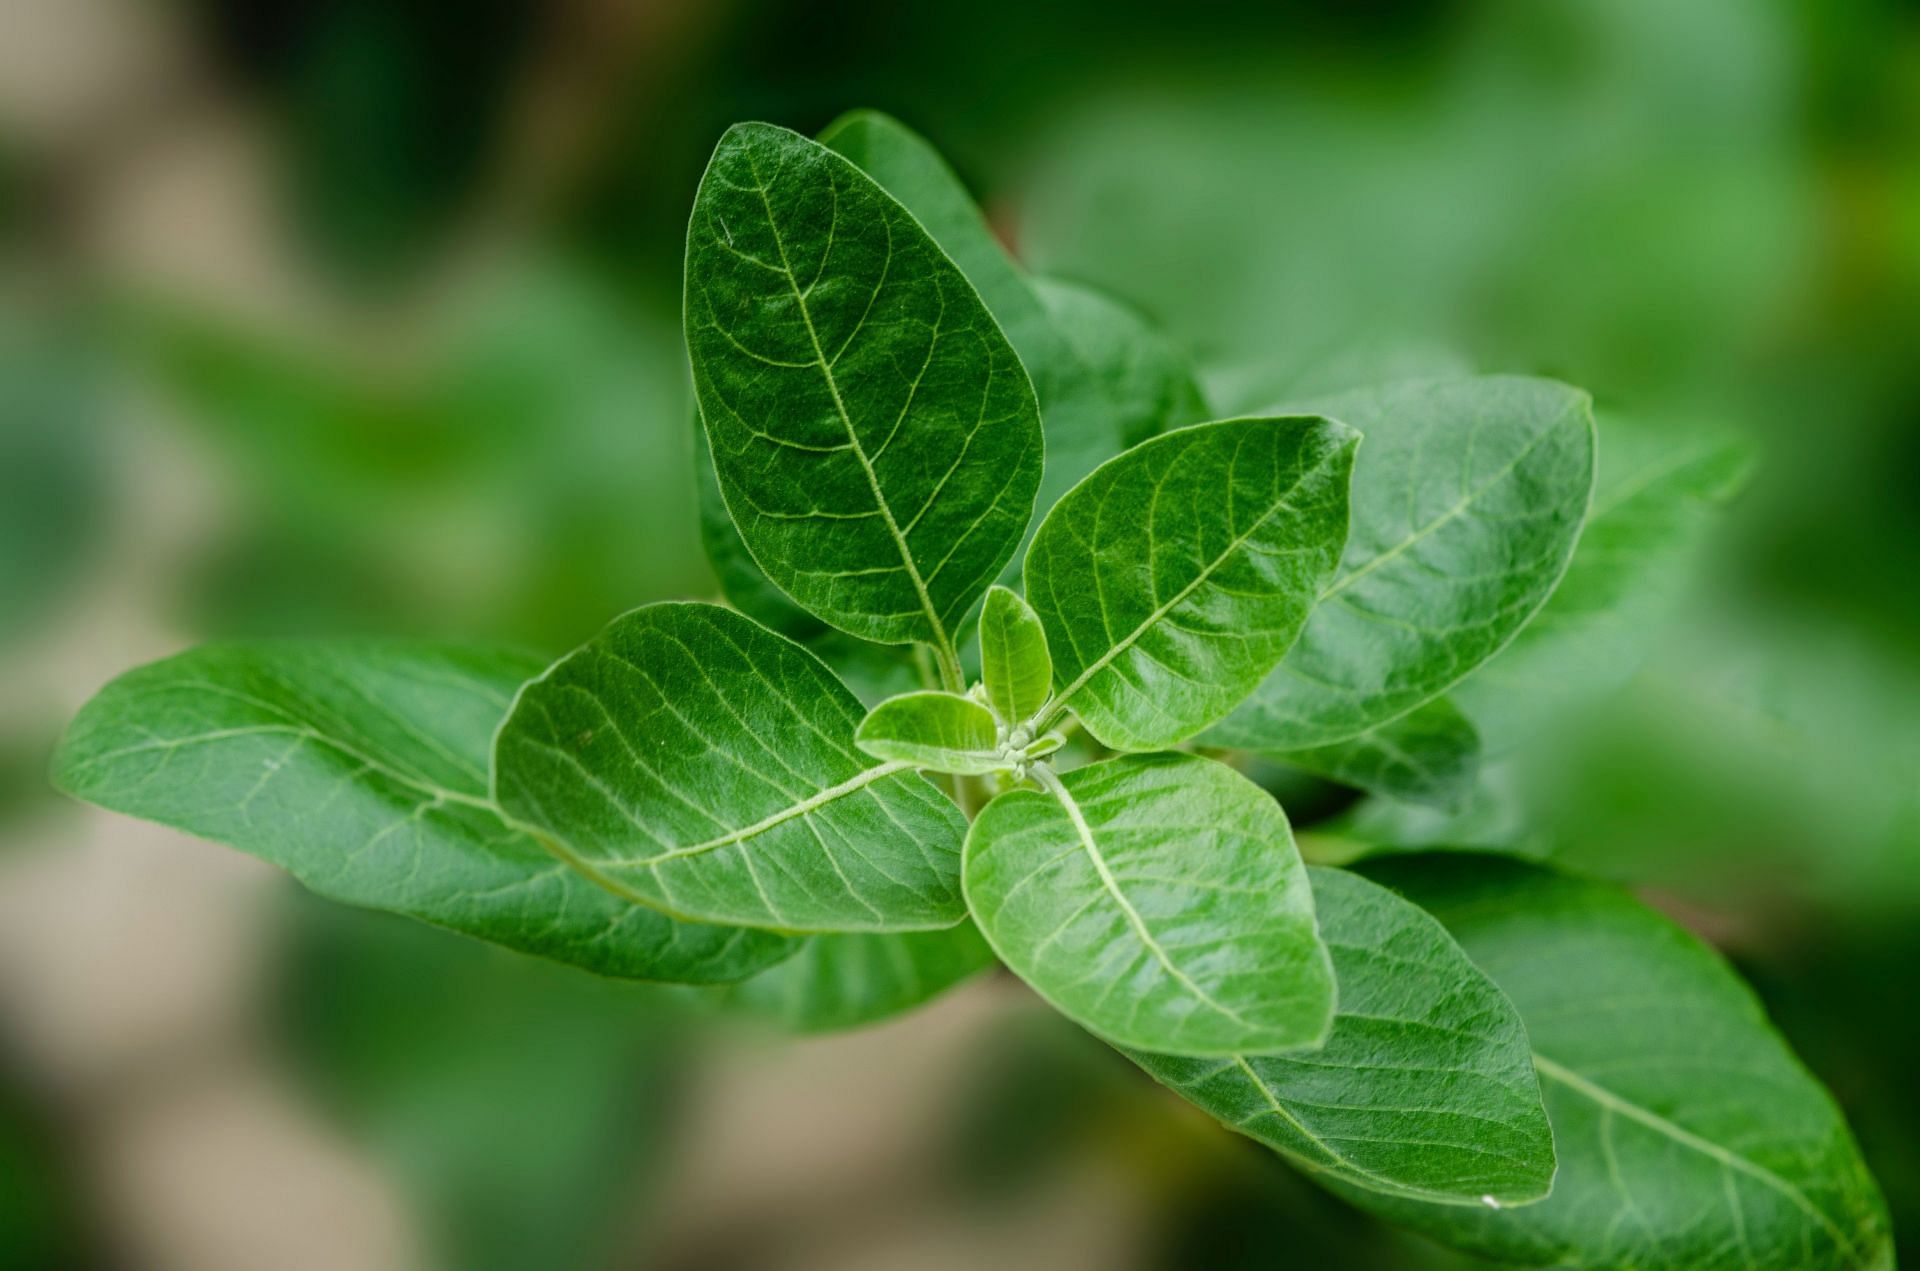 Can Ashwagandha improve your fertility? Read on to find out. (Image via unsplash/Bankim Desai)